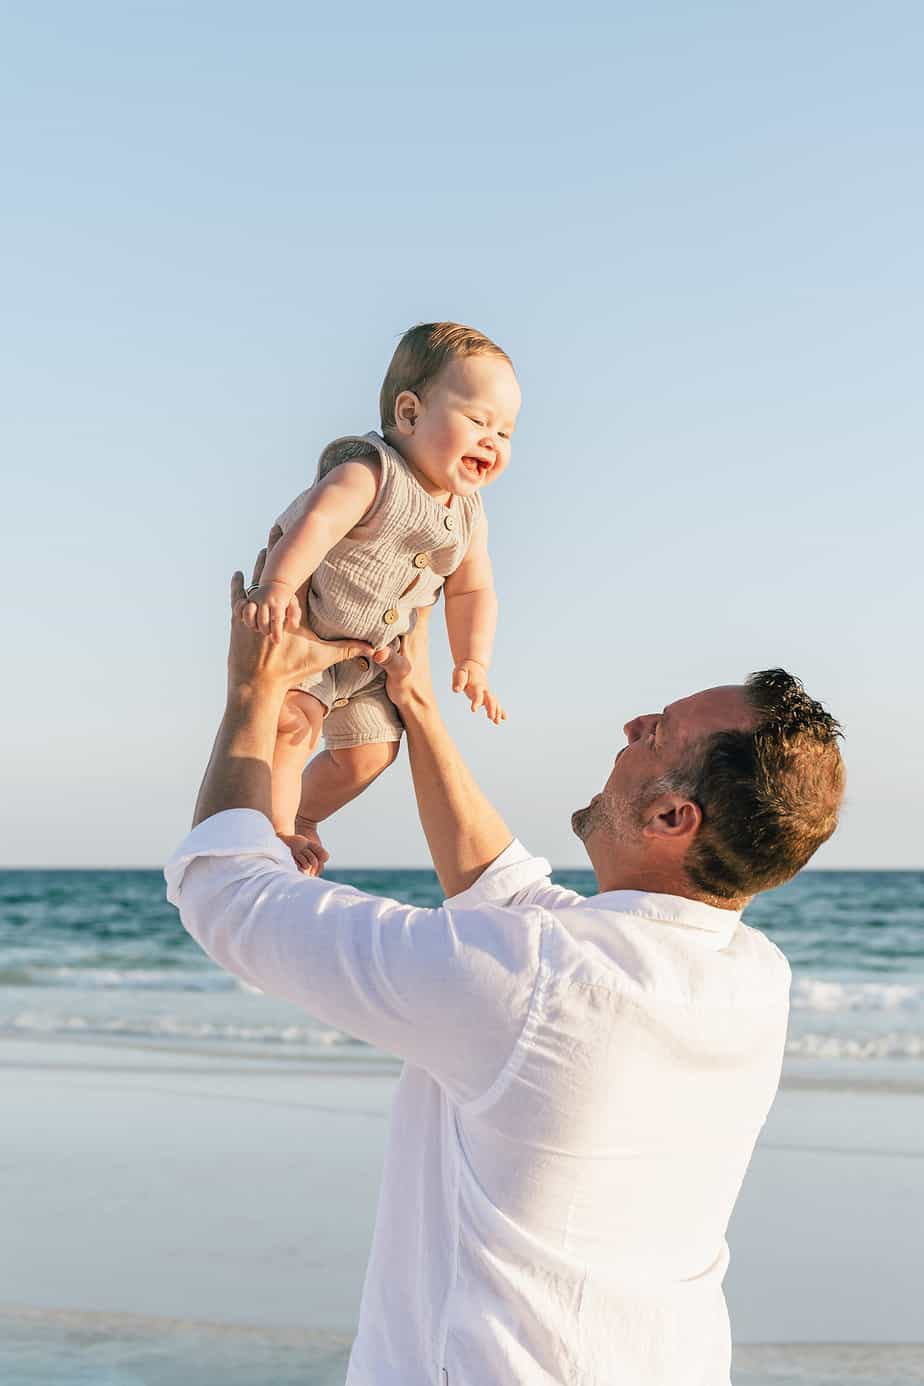 a father tossing his baby in the air at the beach